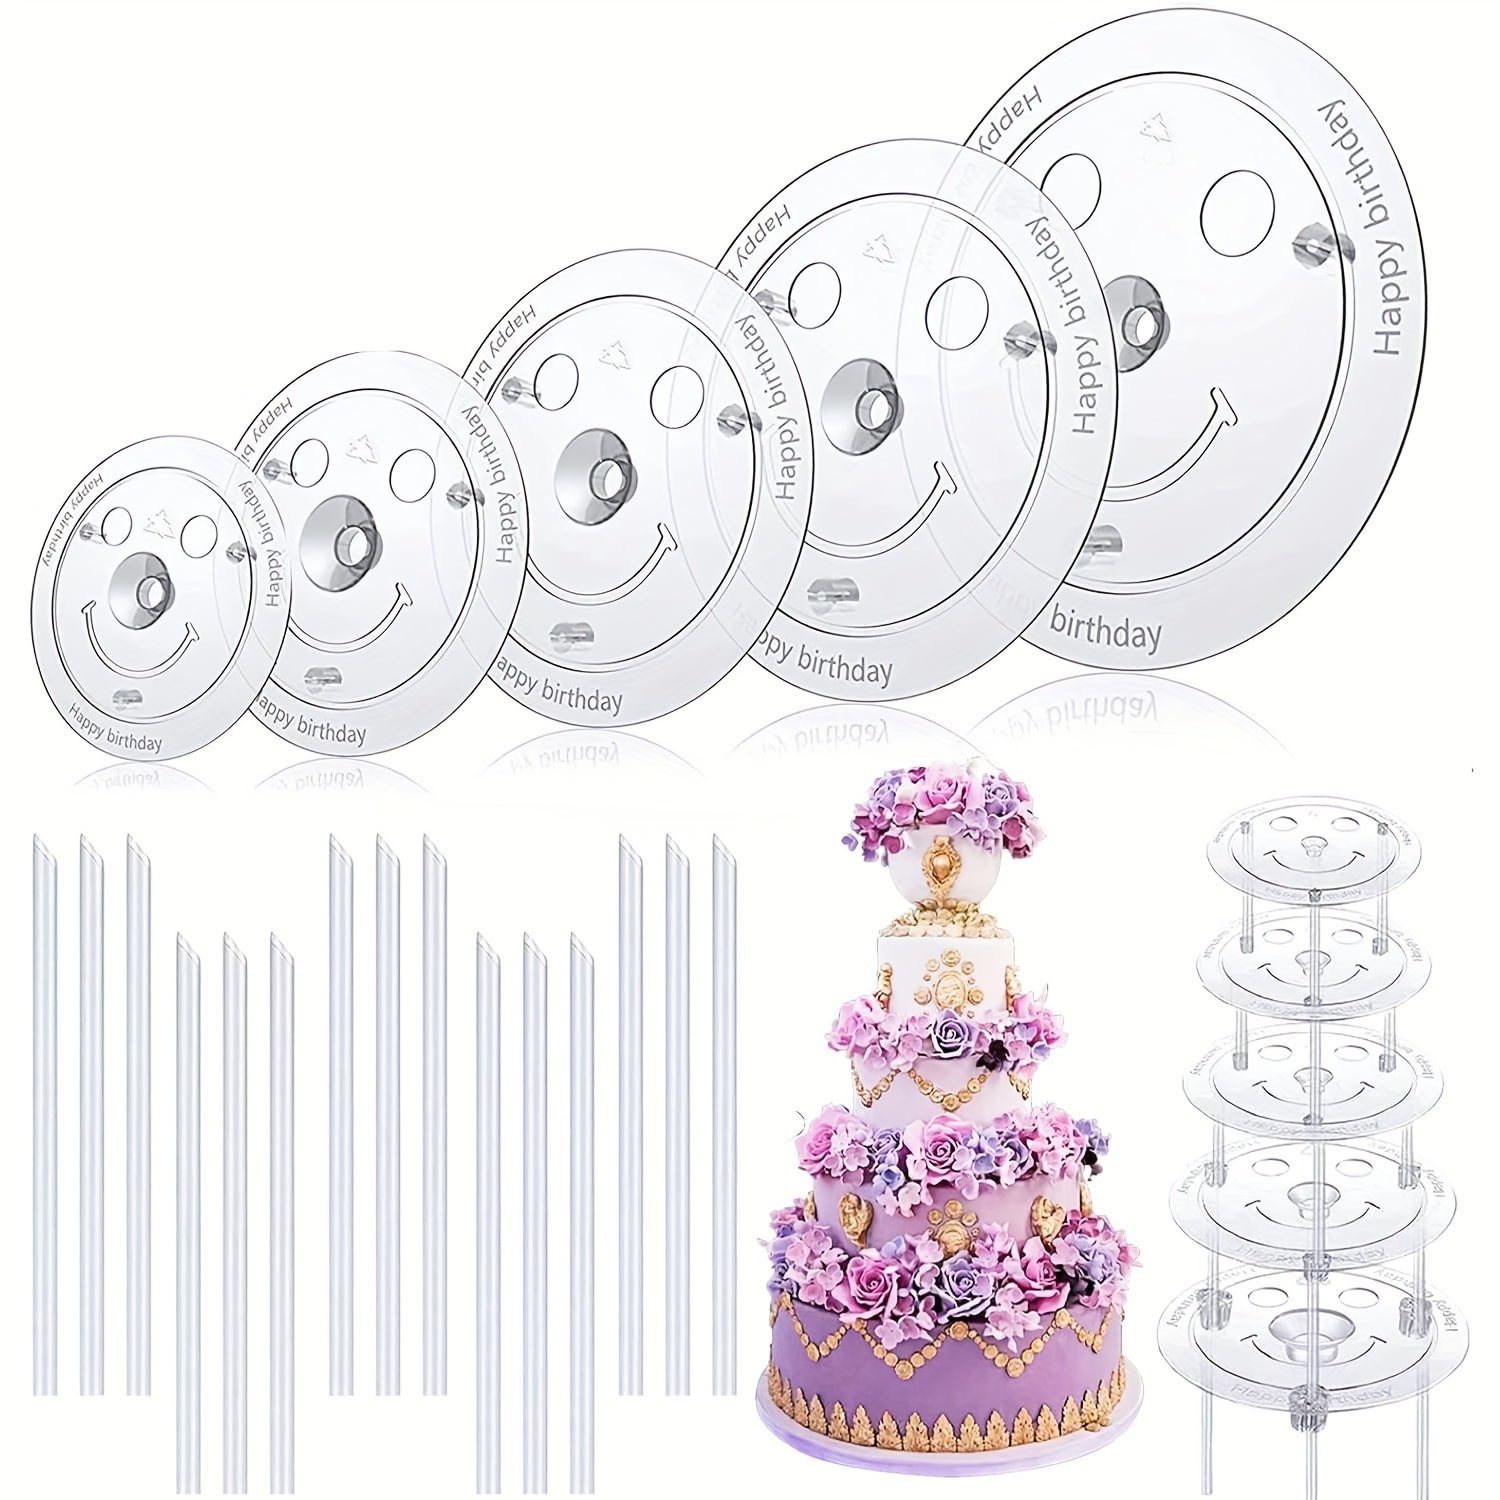 

1pc, 5-tier Acrylic Cake Stand Set With 15 Support Dowels, Reusable, Multi-layer Cake Display For Weddings, Birthdays, Parties, Celebratory Festive Decor